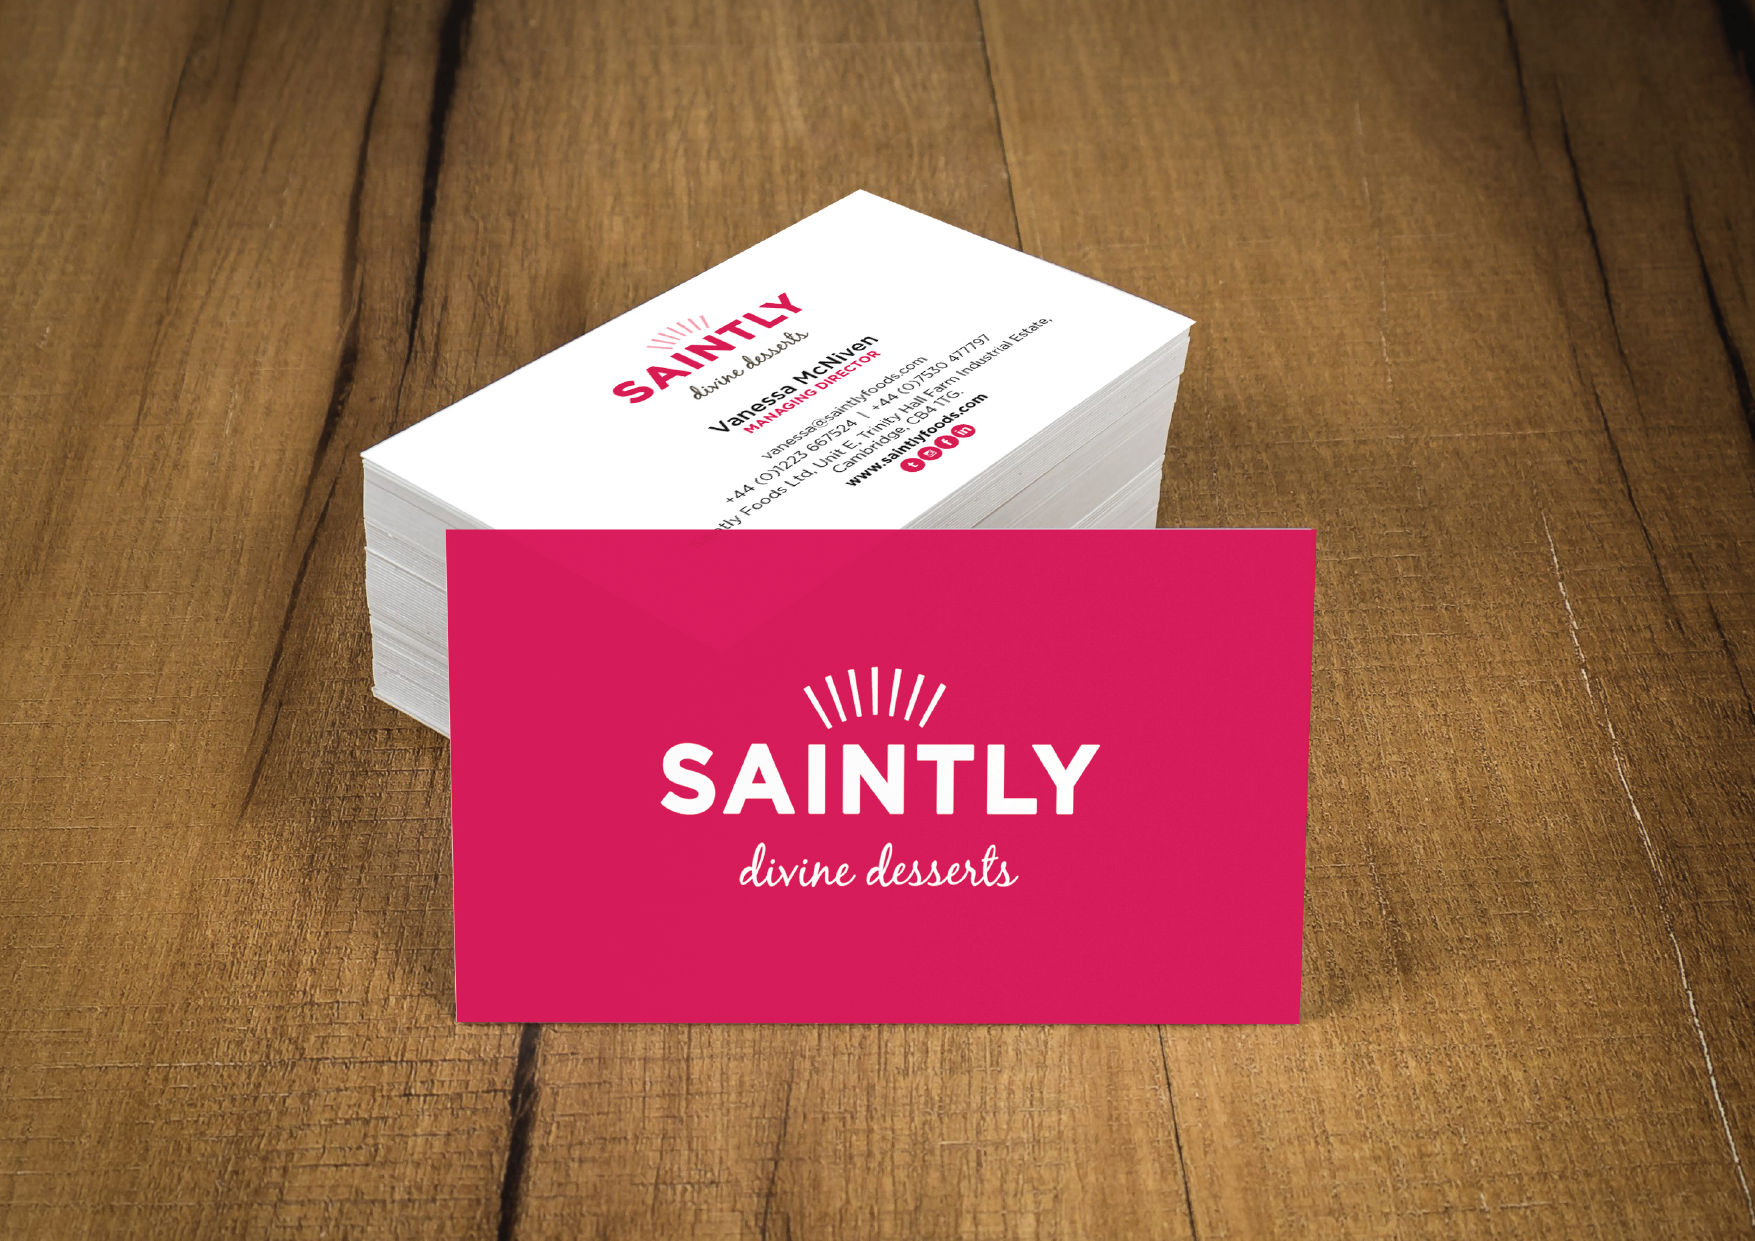 IMAGES FOR WEBSITE_SAINTLY-08.png